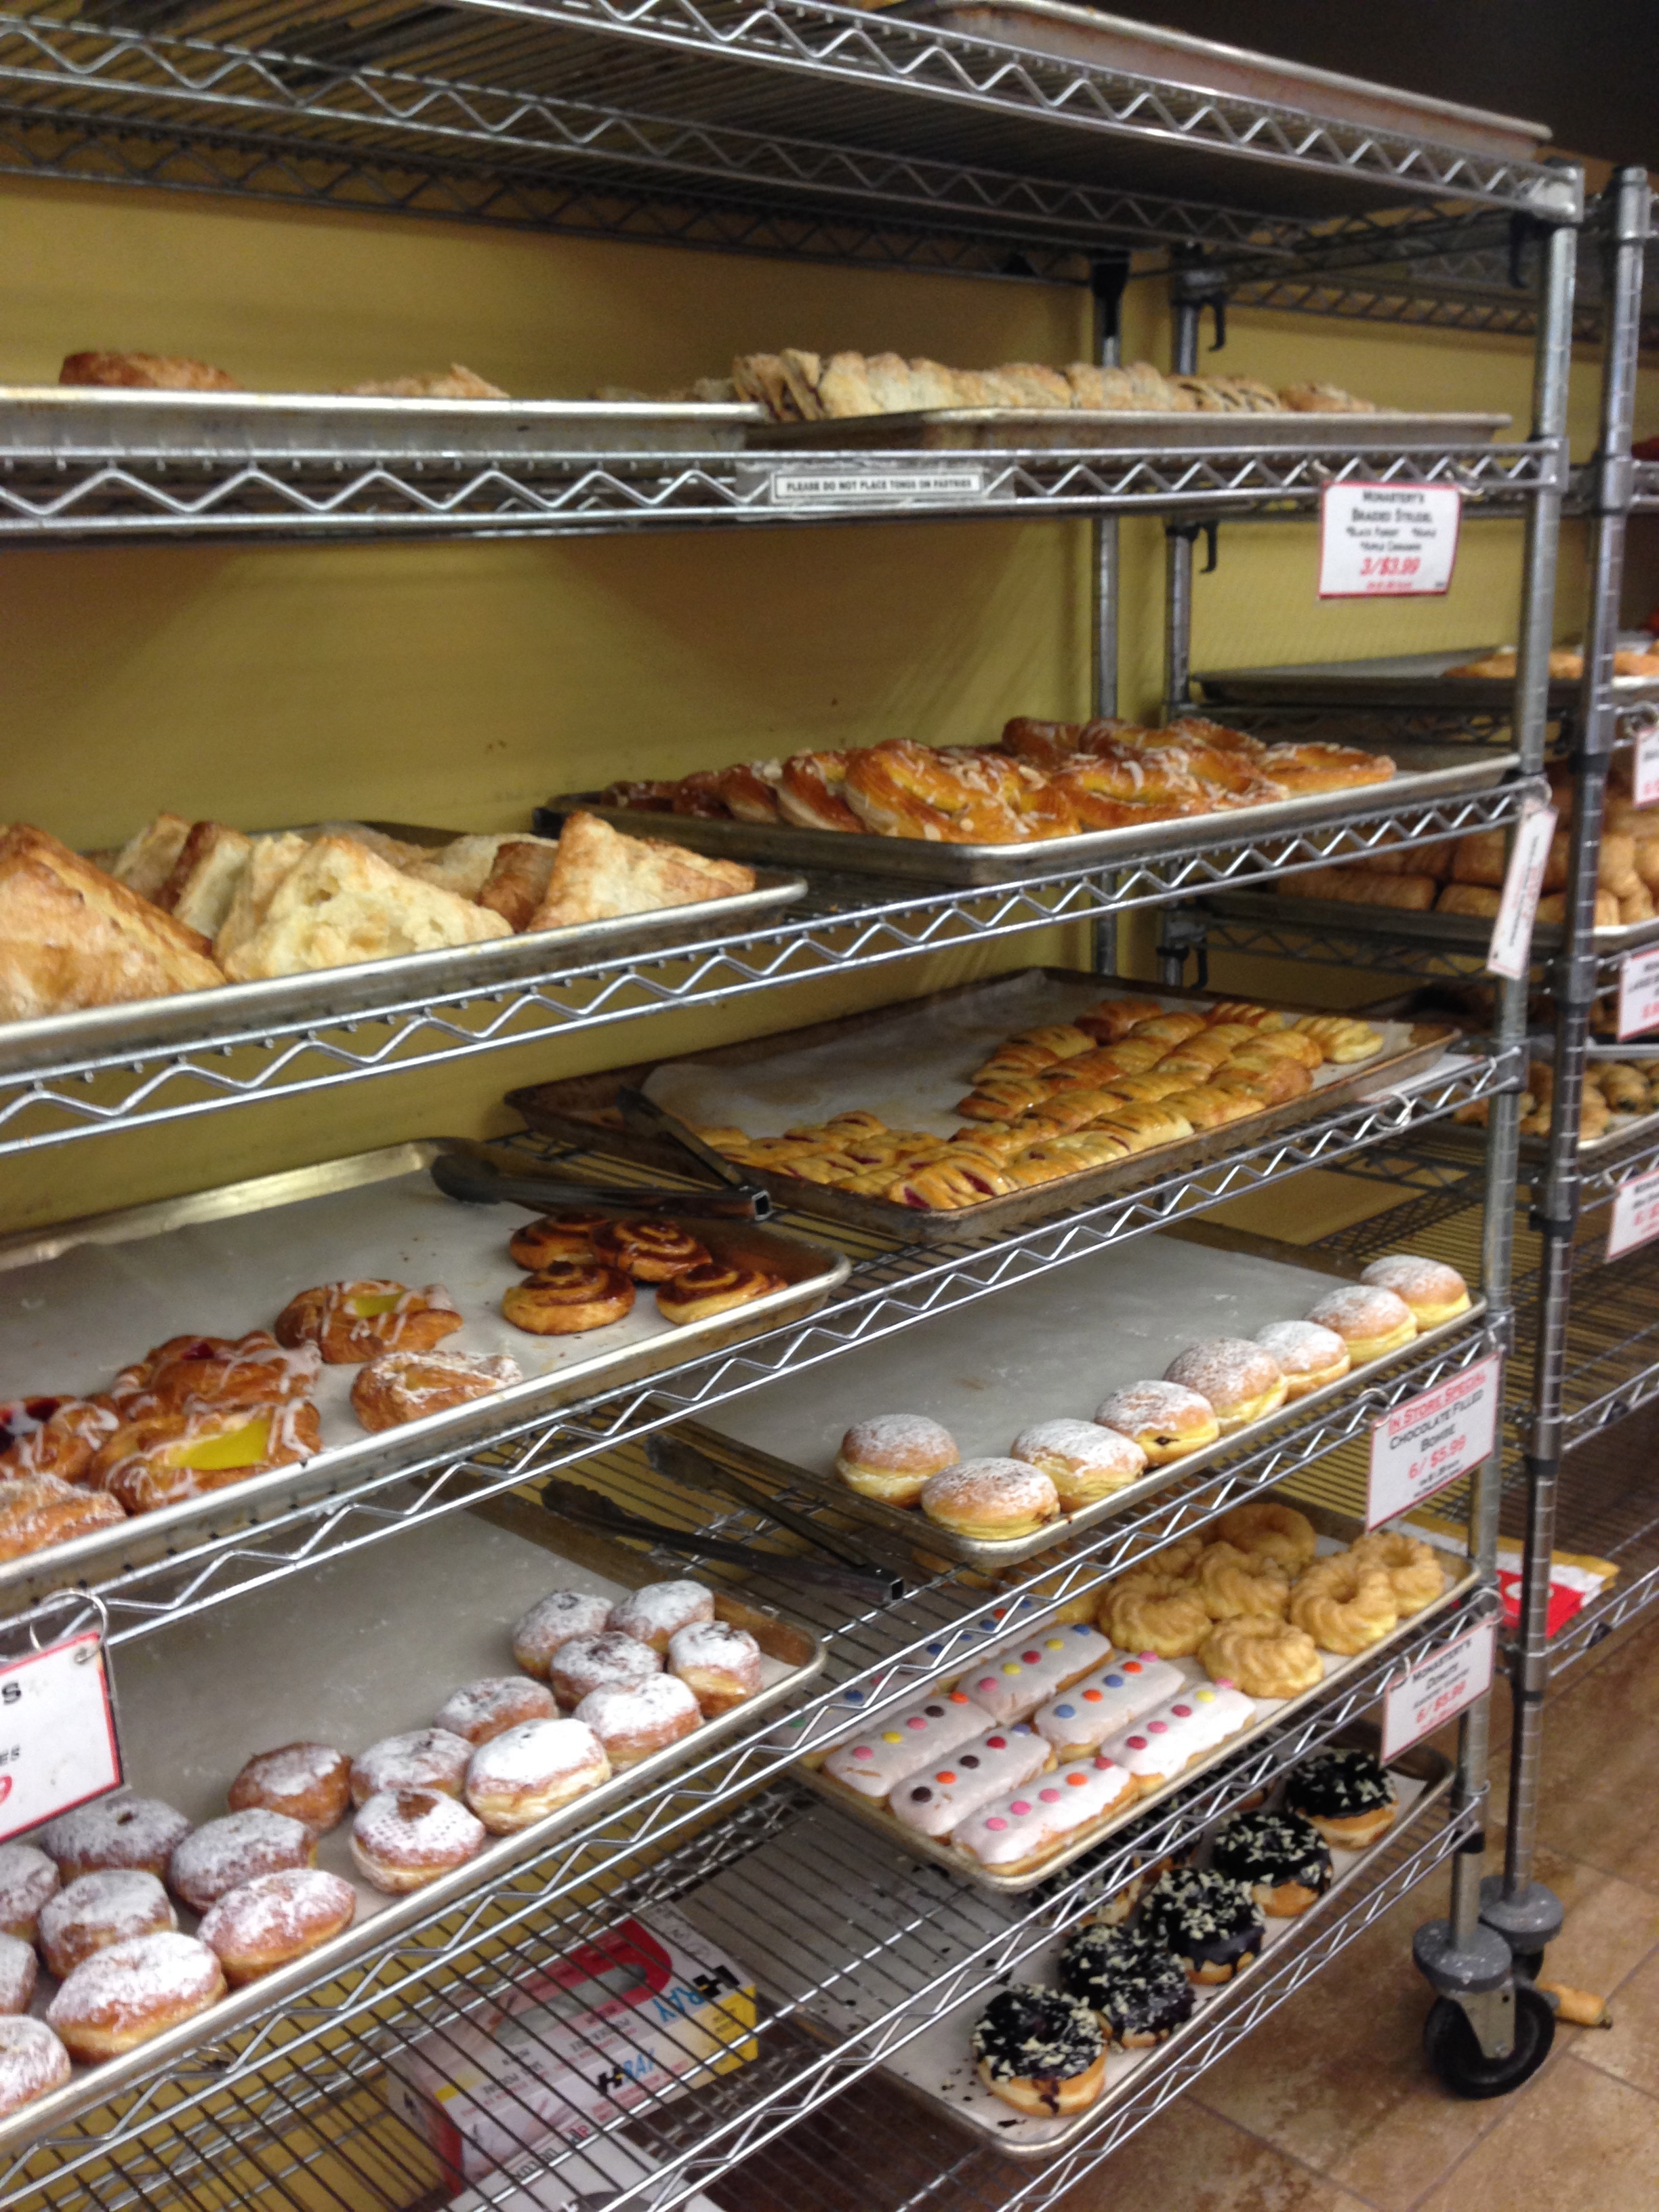 Racks of donuts and fruit turnovers.